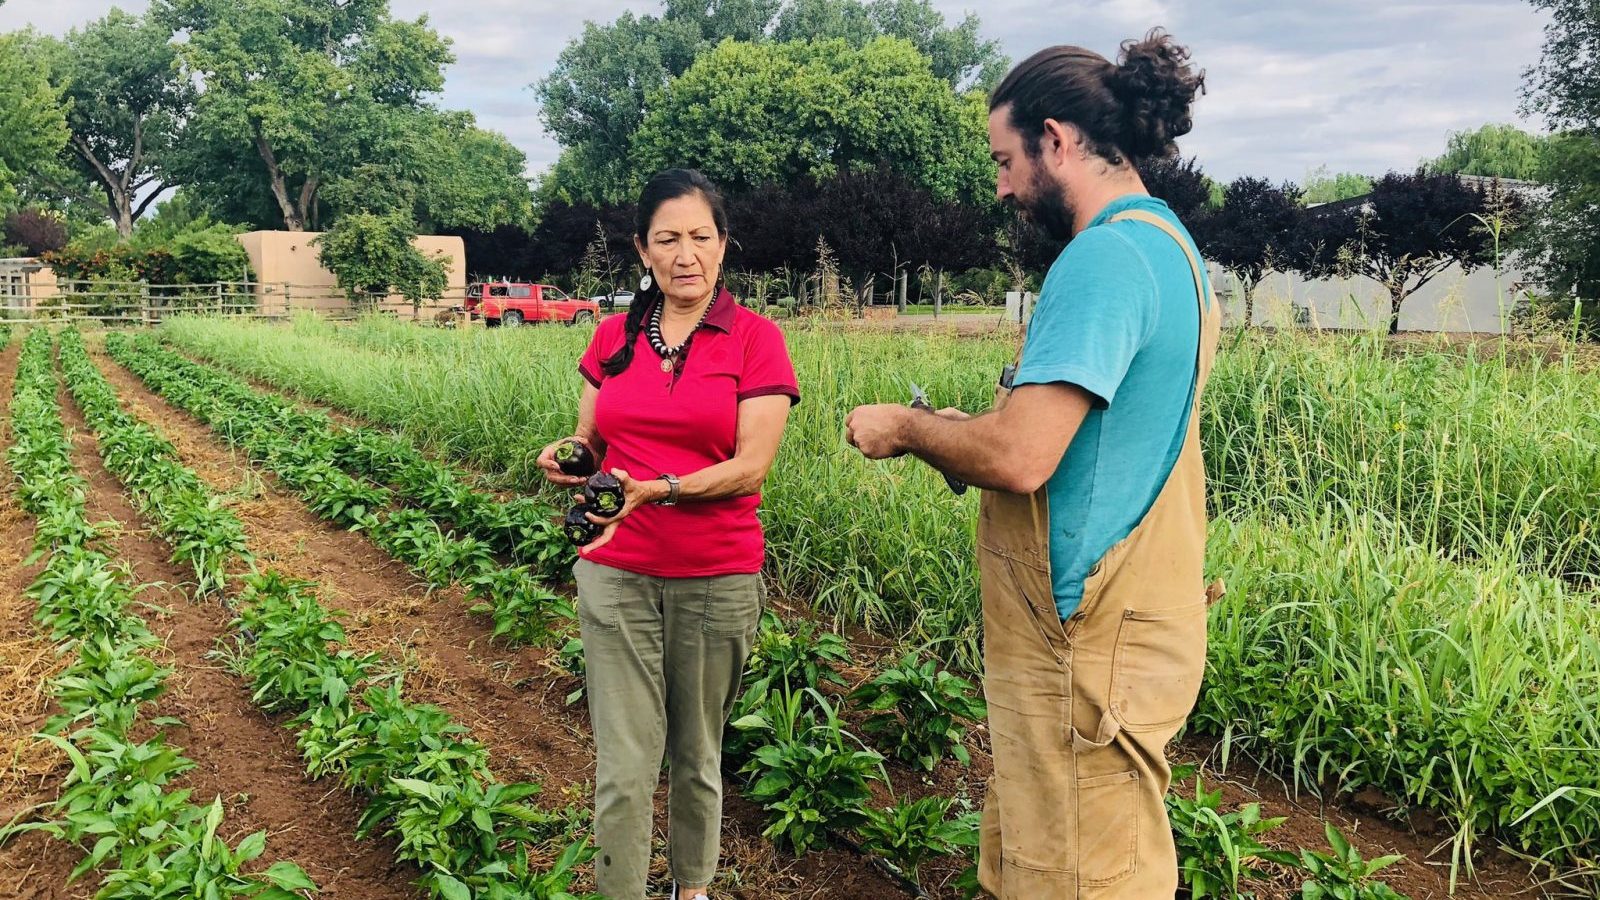 Deb Haaland holding eggplants in hand while speaking with a farmer in the middle of an eggplant field